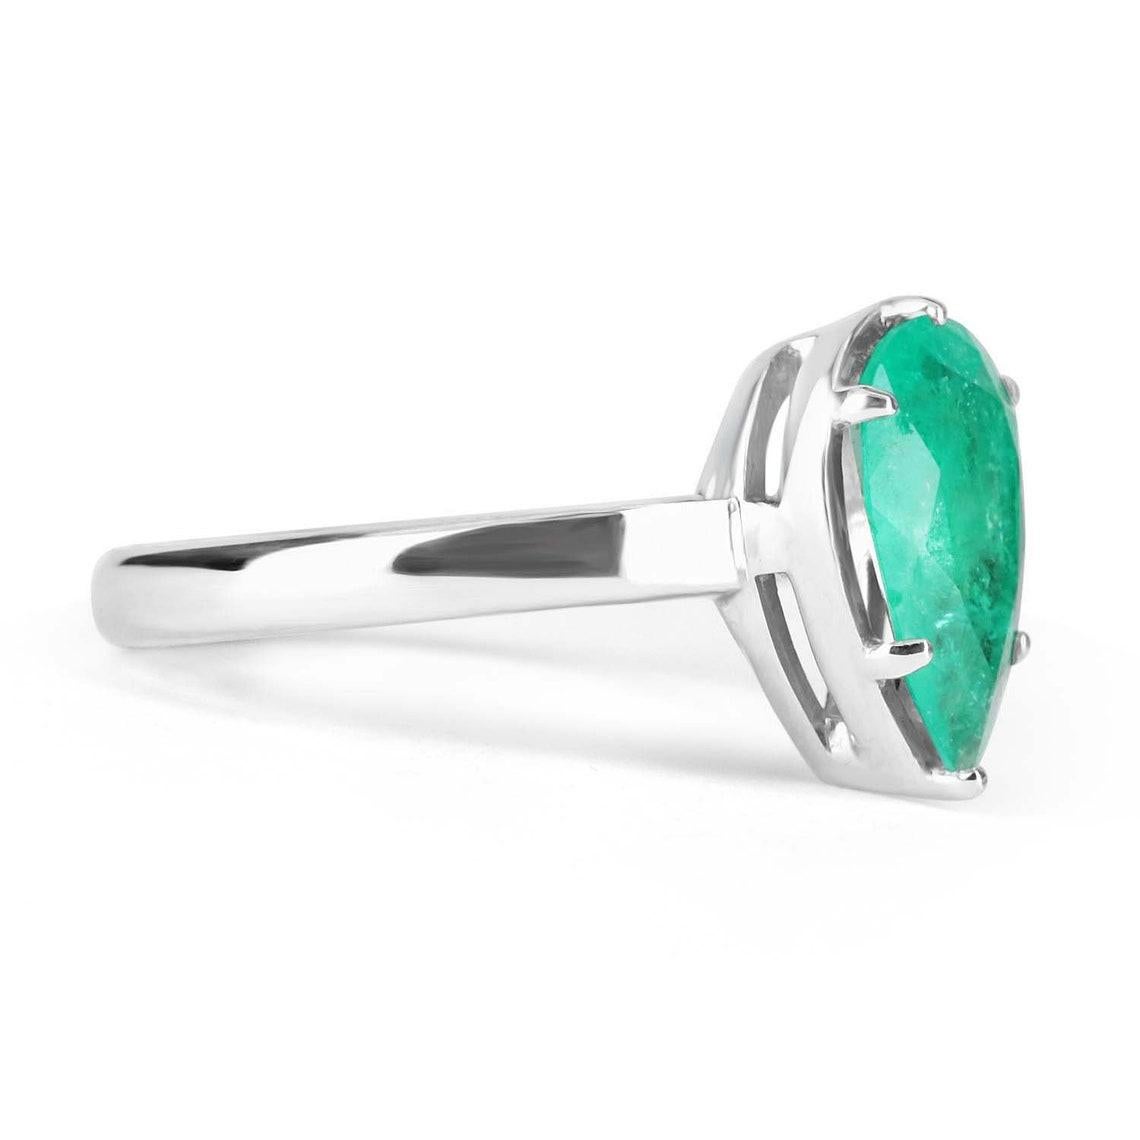 Displayed is a custom emerald solitaire pear-cut engagement/right-hand ring in 14K white gold. This gorgeous solitaire ring carries a 1.65-carat emerald in a six-prong setting. The emerald has very good clarity with minor flaws that are normal in